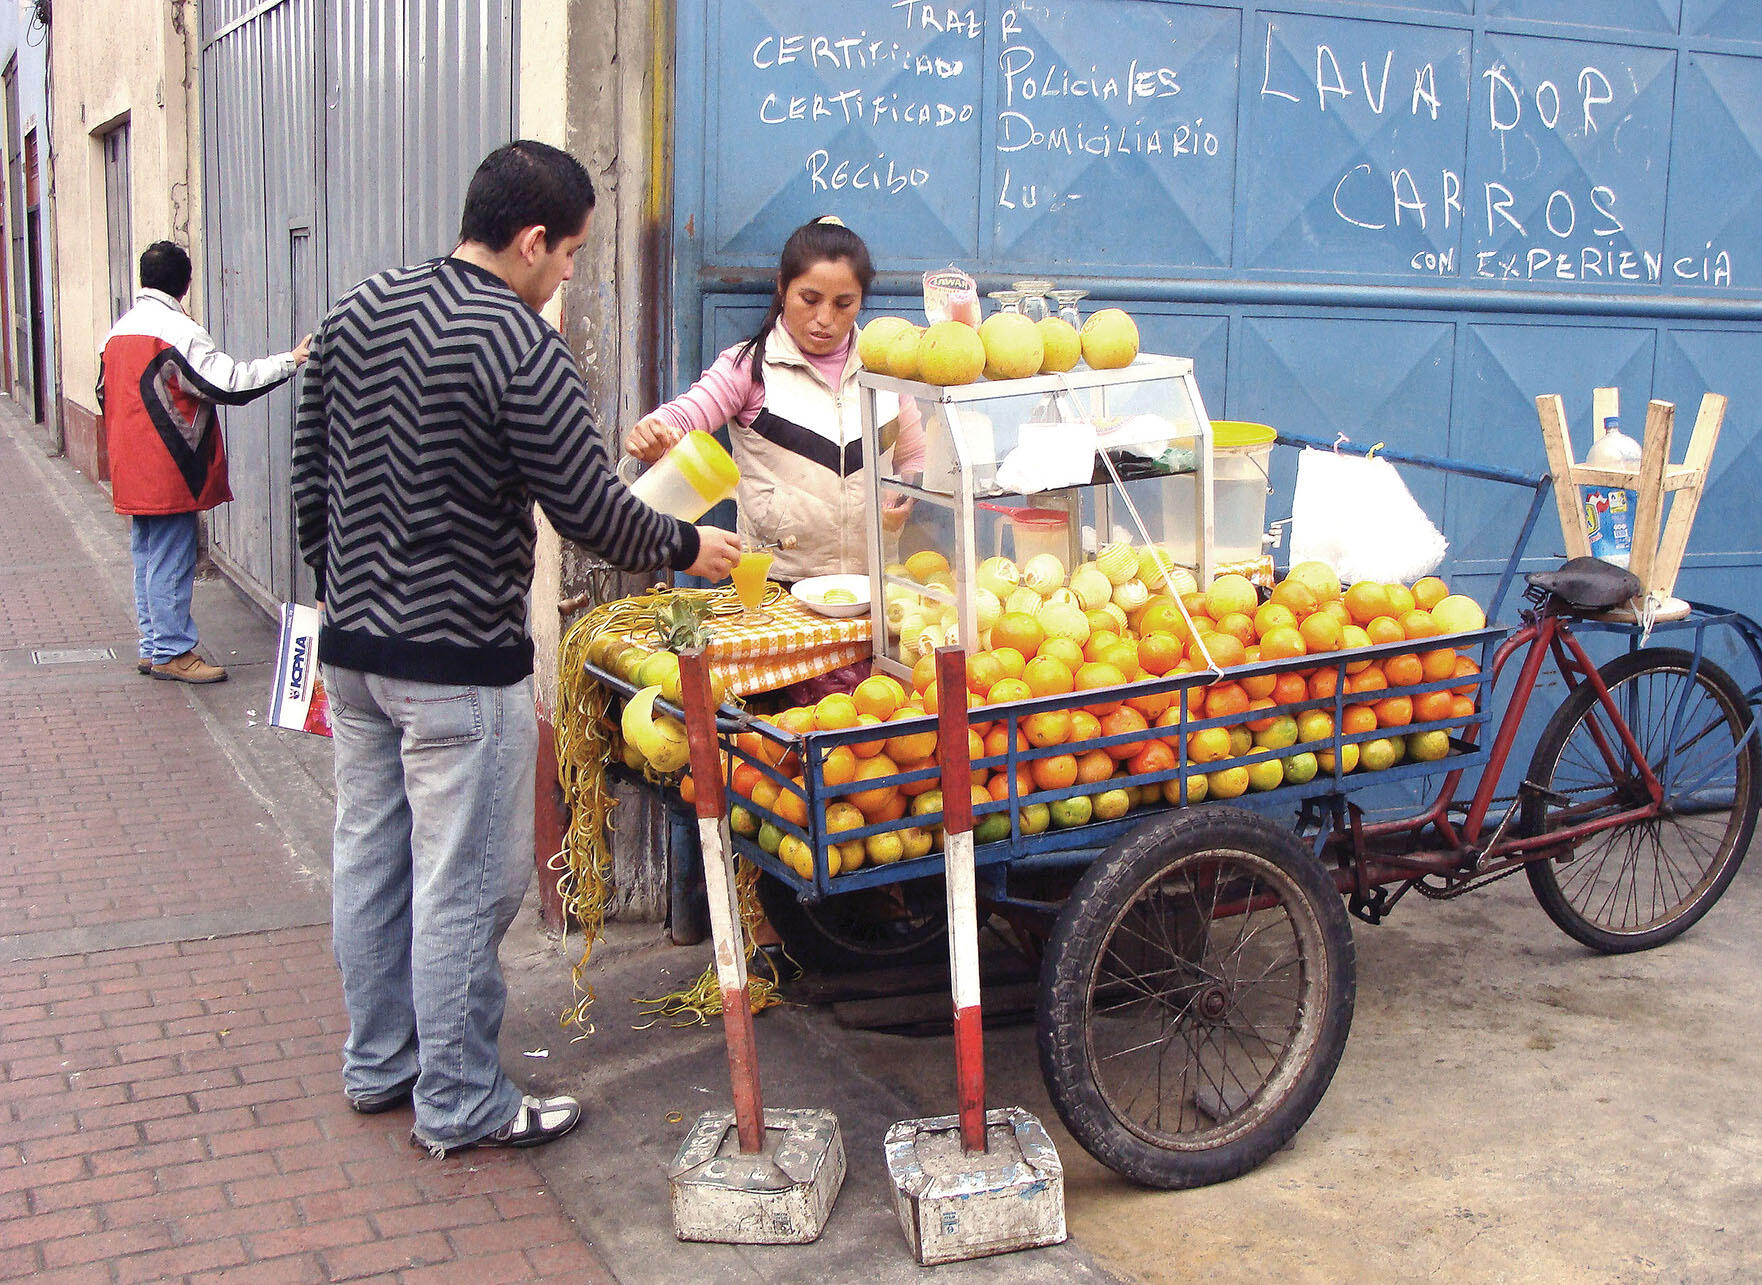 A fruit seller working from an old wooden handcart on the sidewalk makes a living in Peru’s informal labor market. (Photo by Julia Manzerova.)